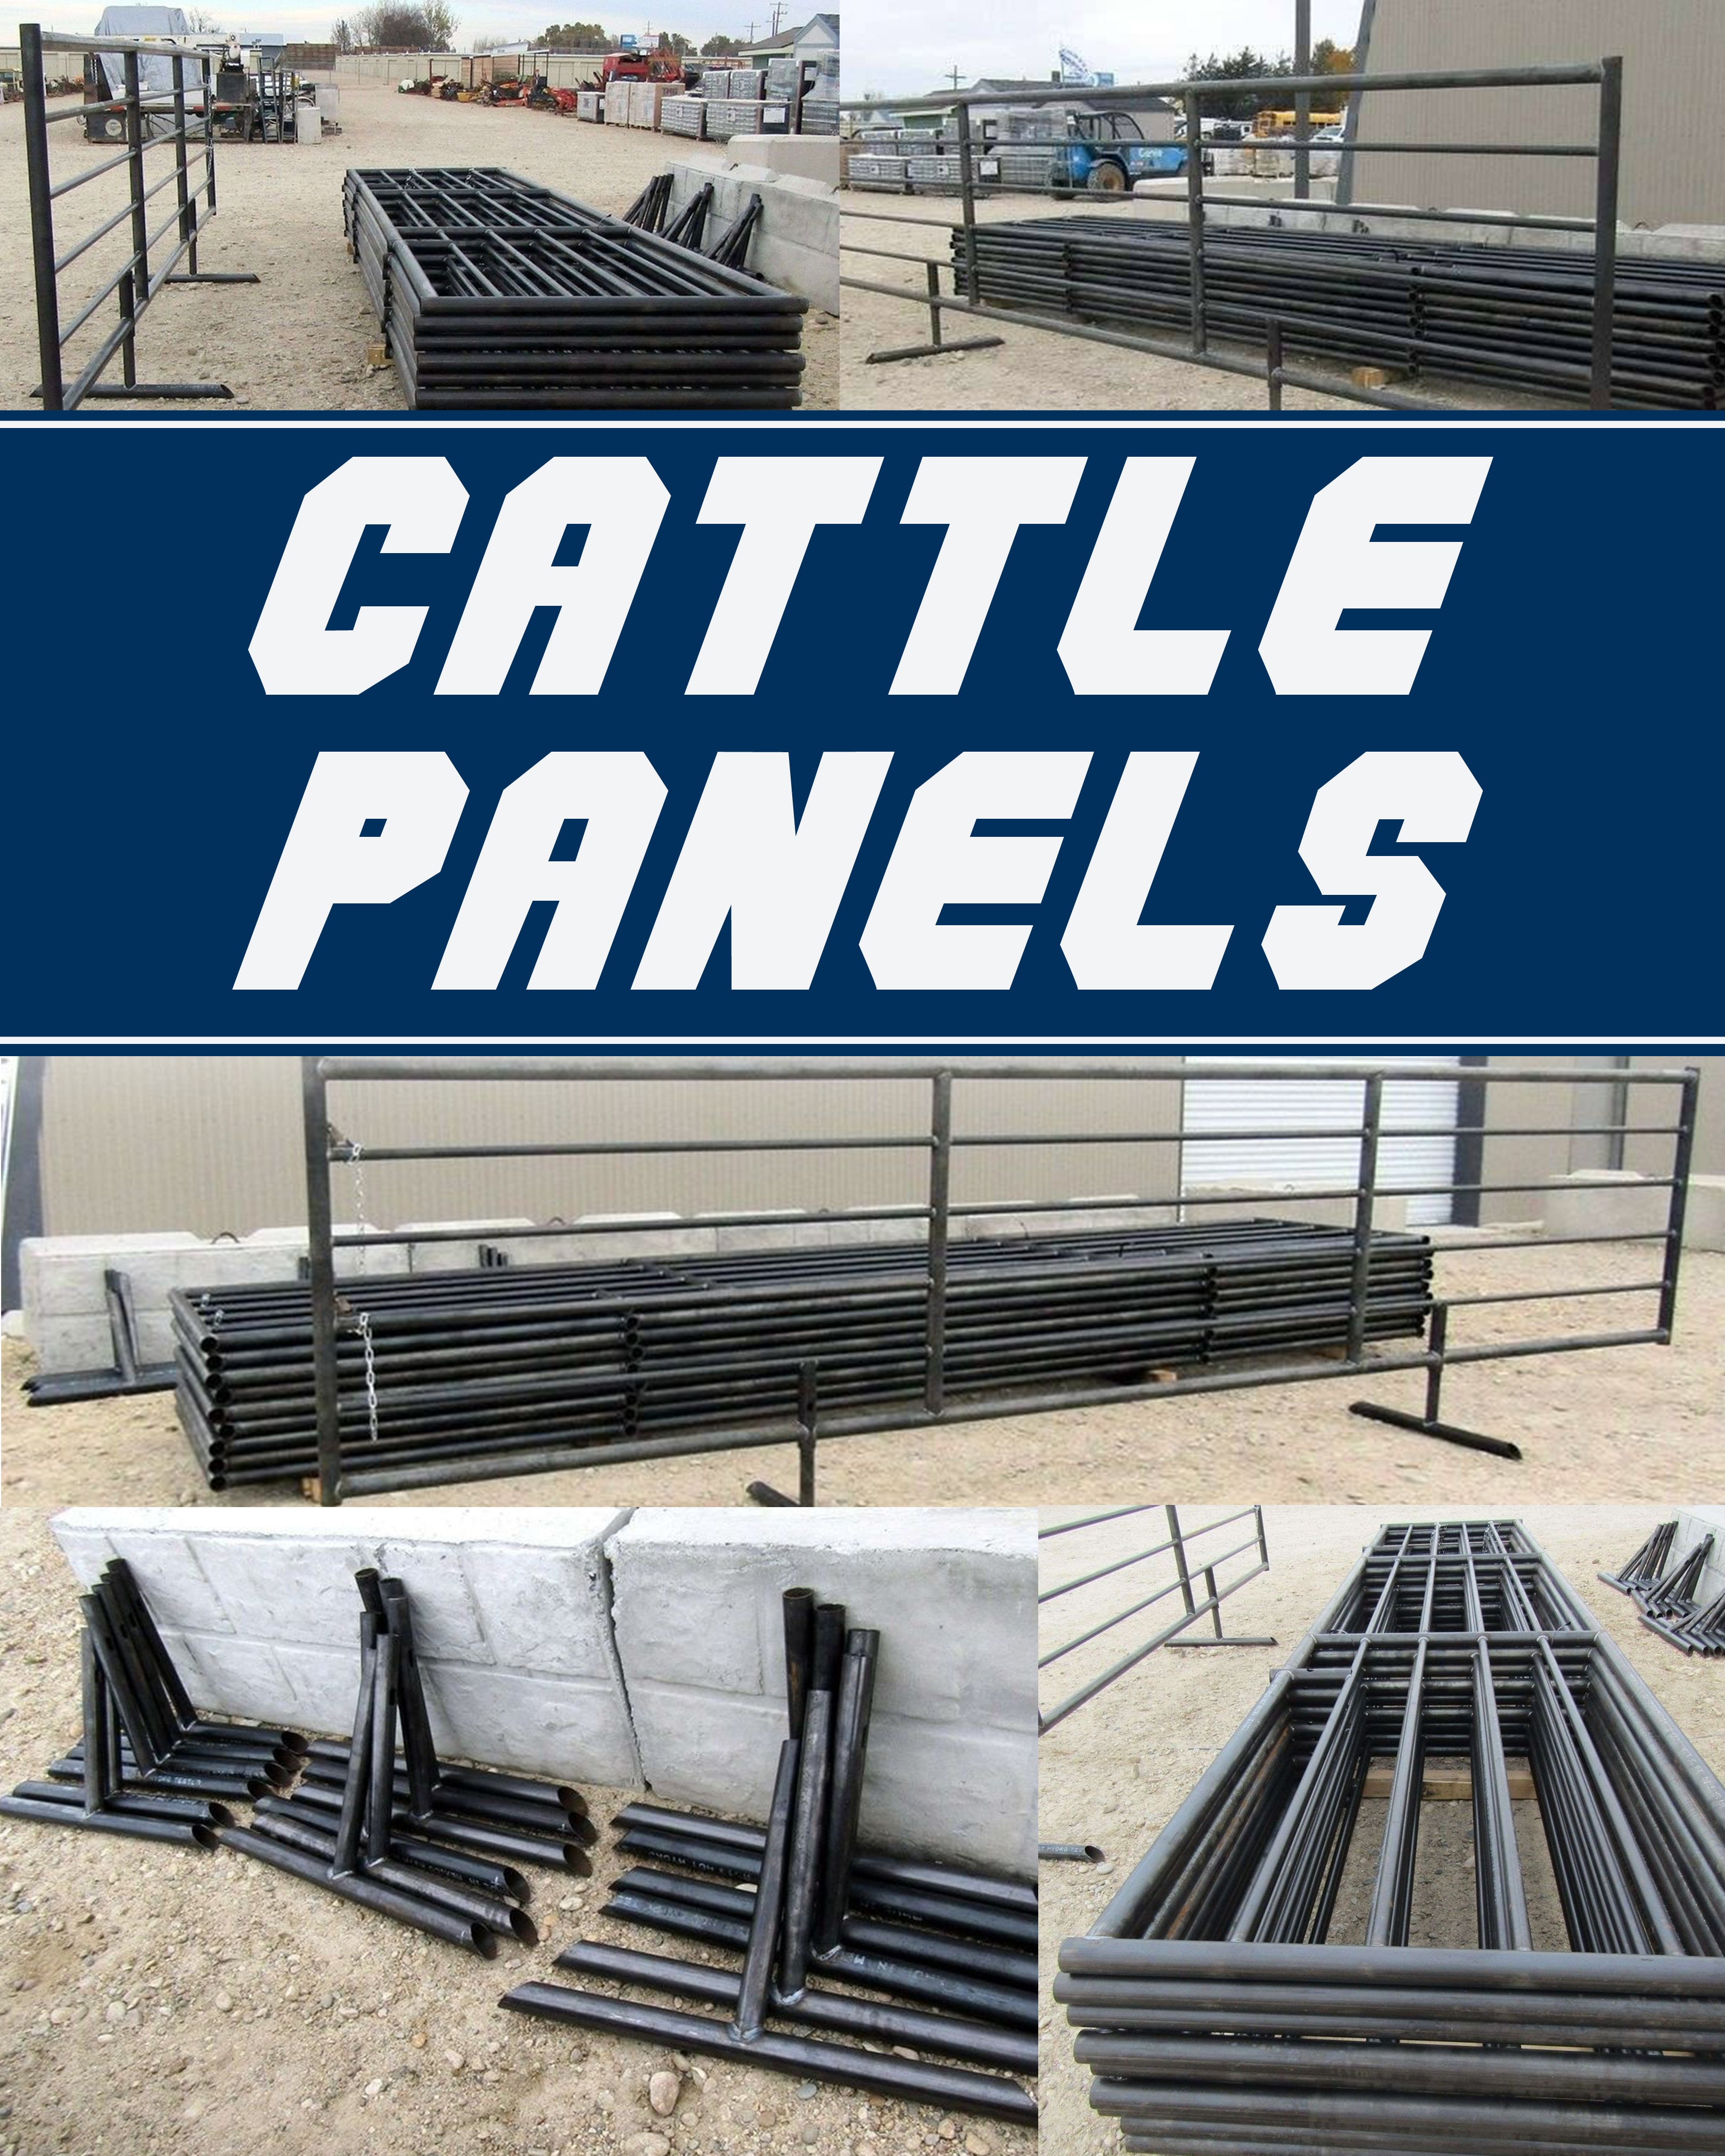 Livestock Cattle Panels Now Available For Sale!